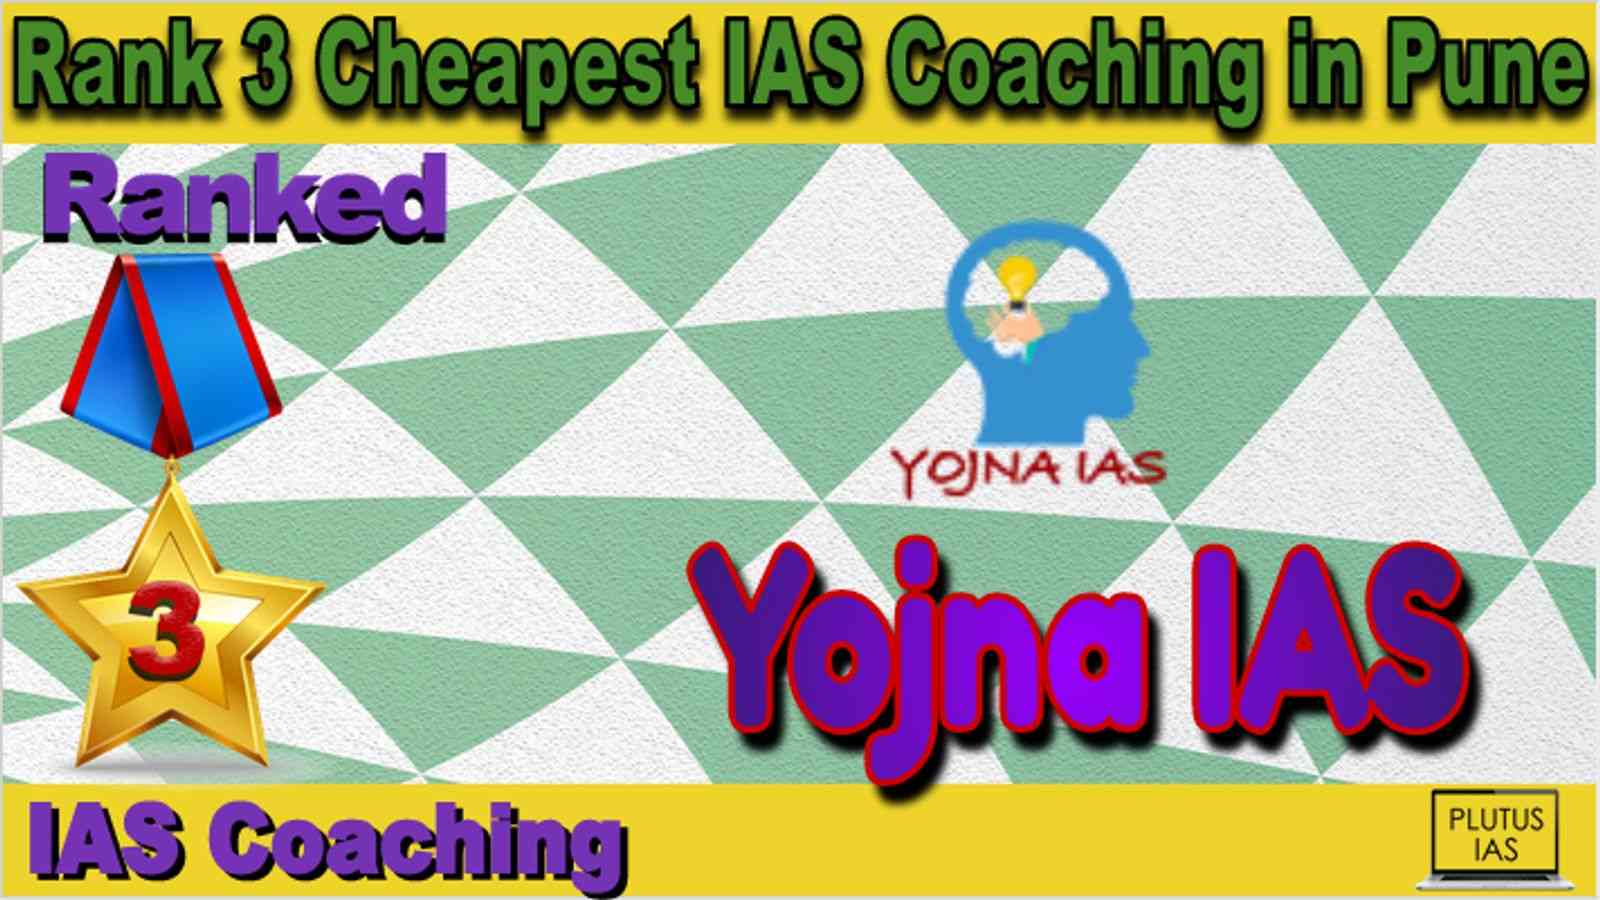 Rank 3 Cheapest IAS Coaching in Pune